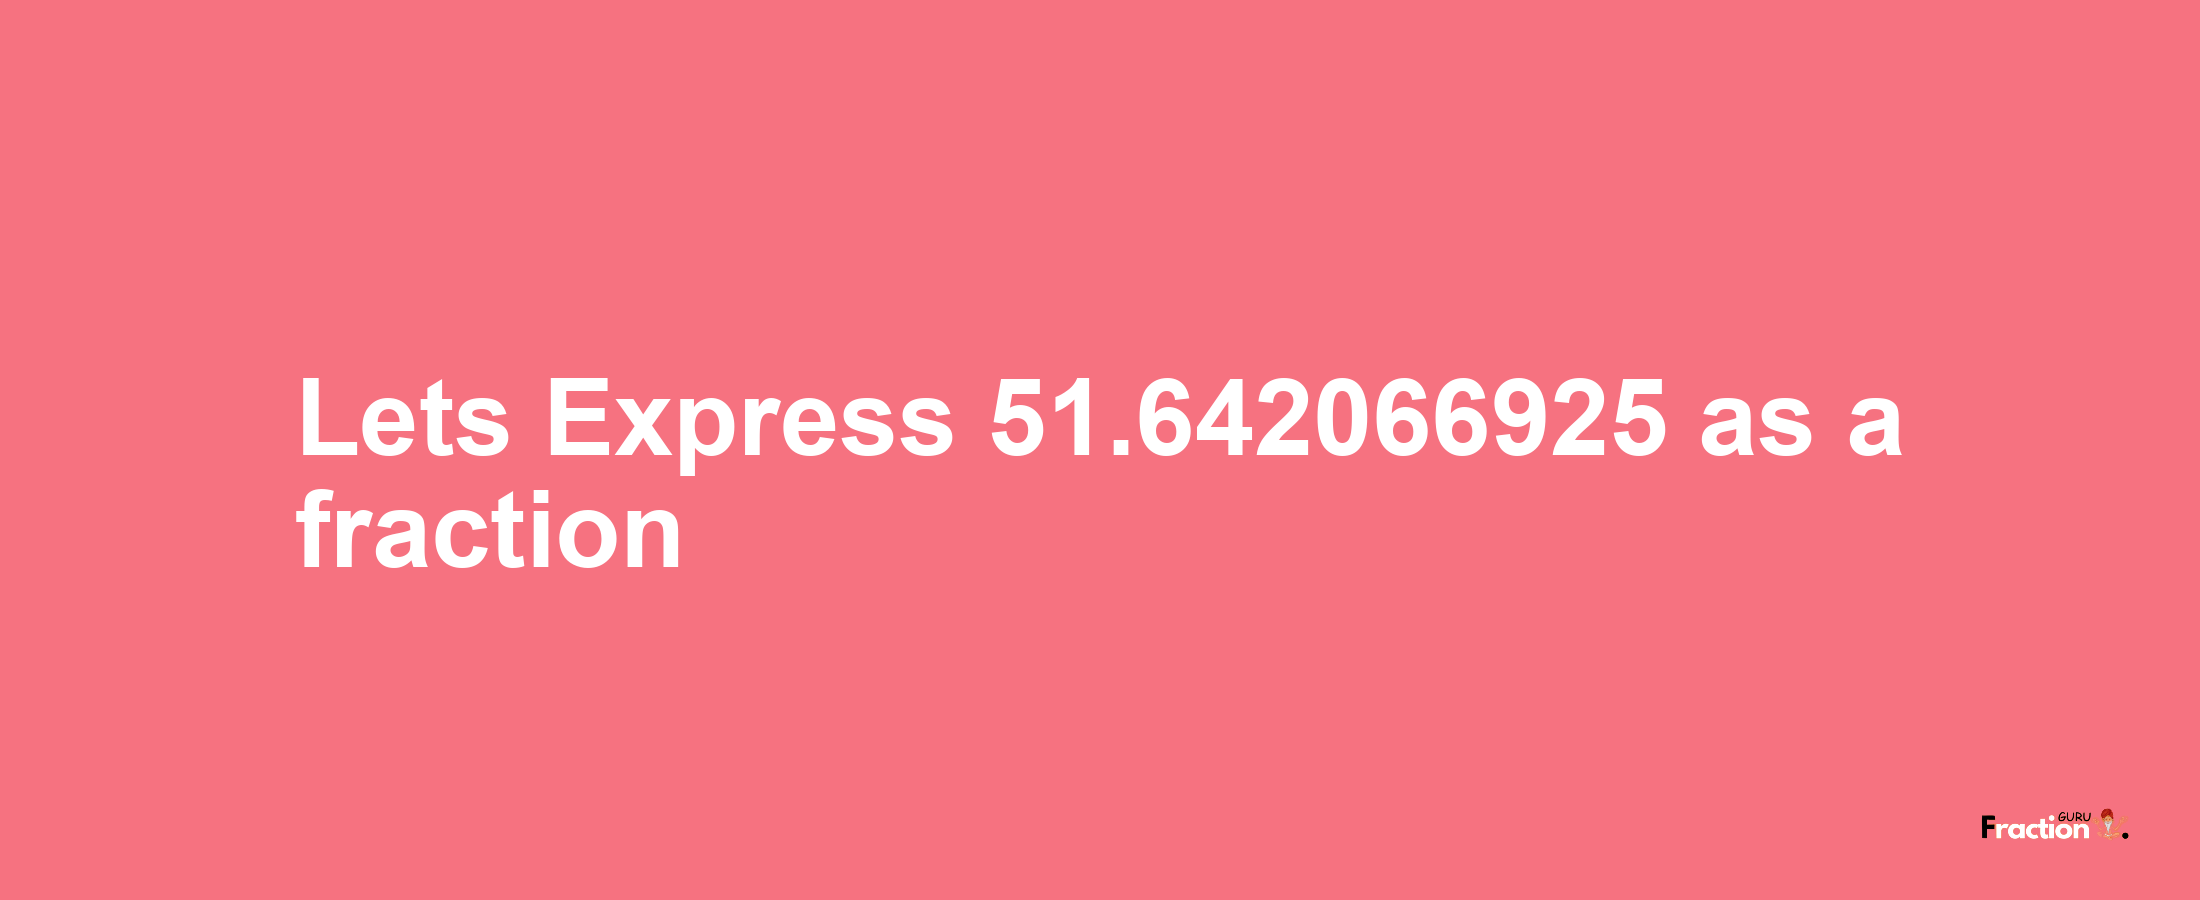 Lets Express 51.642066925 as afraction